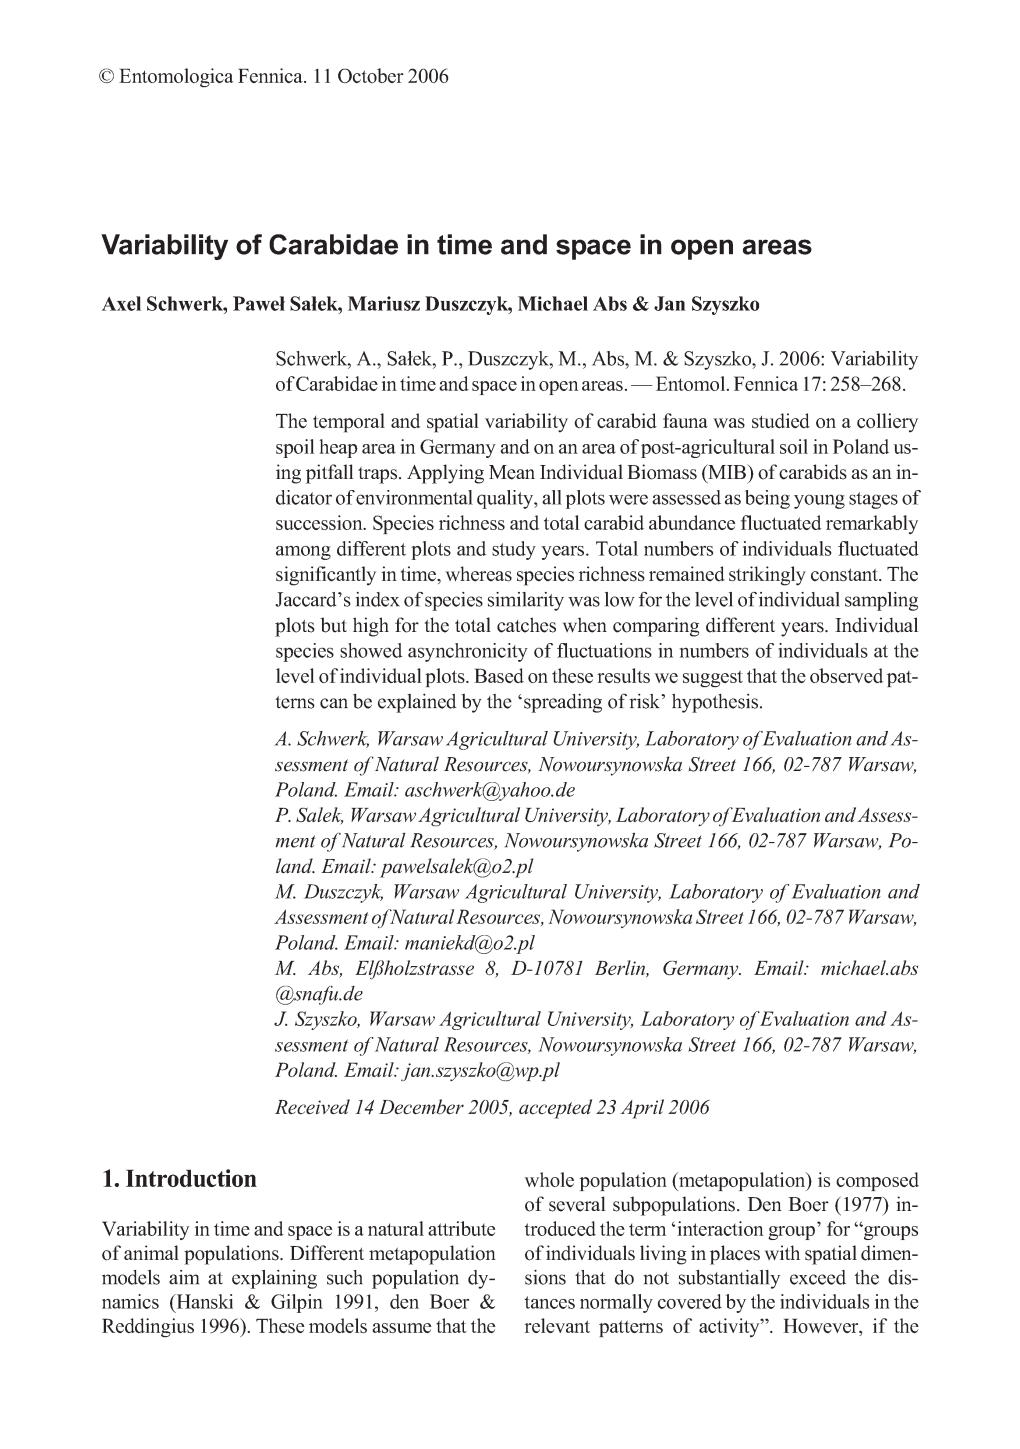 Variability of Carabidae in Time and Space in Open Areas